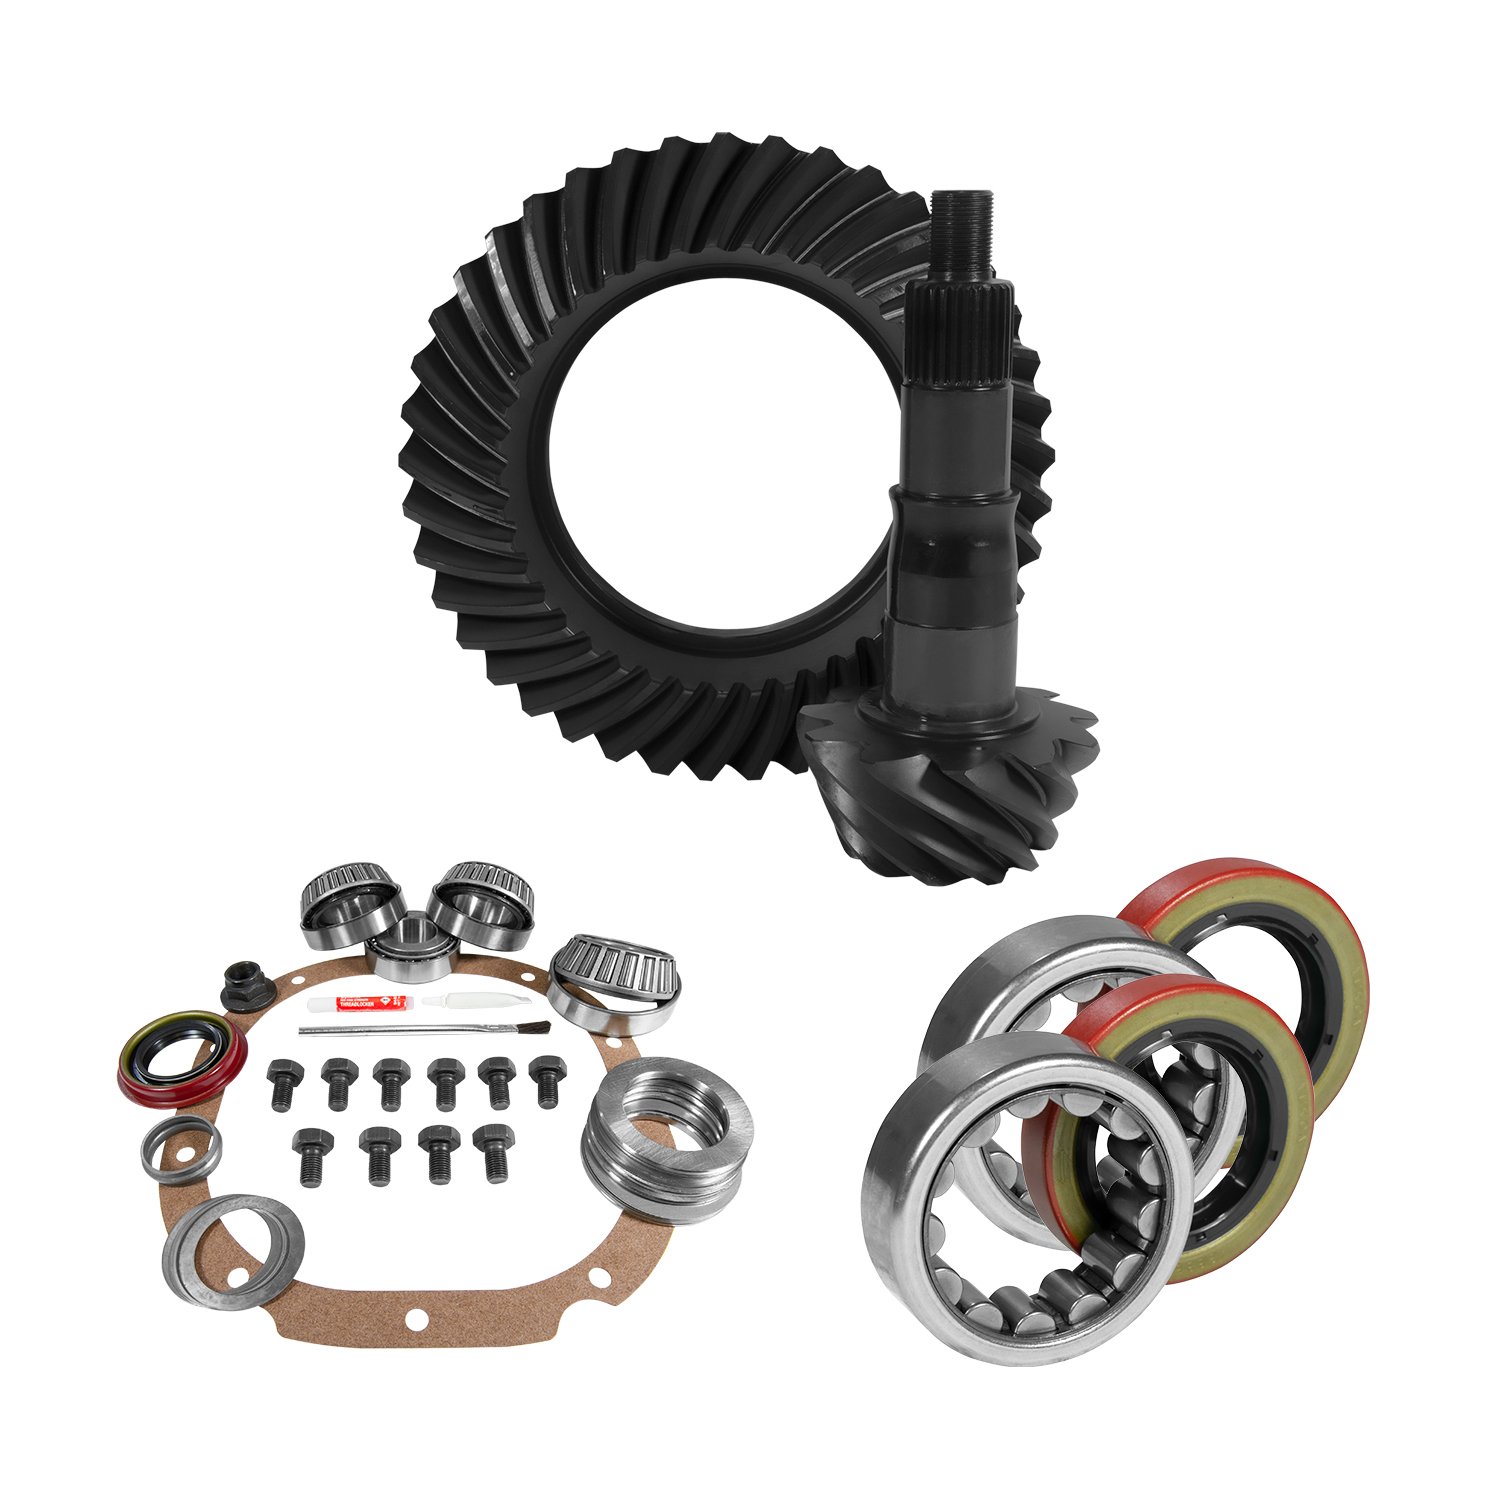 USA Standard 10755 8.8 in. Ford 3.31 Rear Ring & Pinion Install Kit, 2.53 in. Od Axle Bearings & Seals